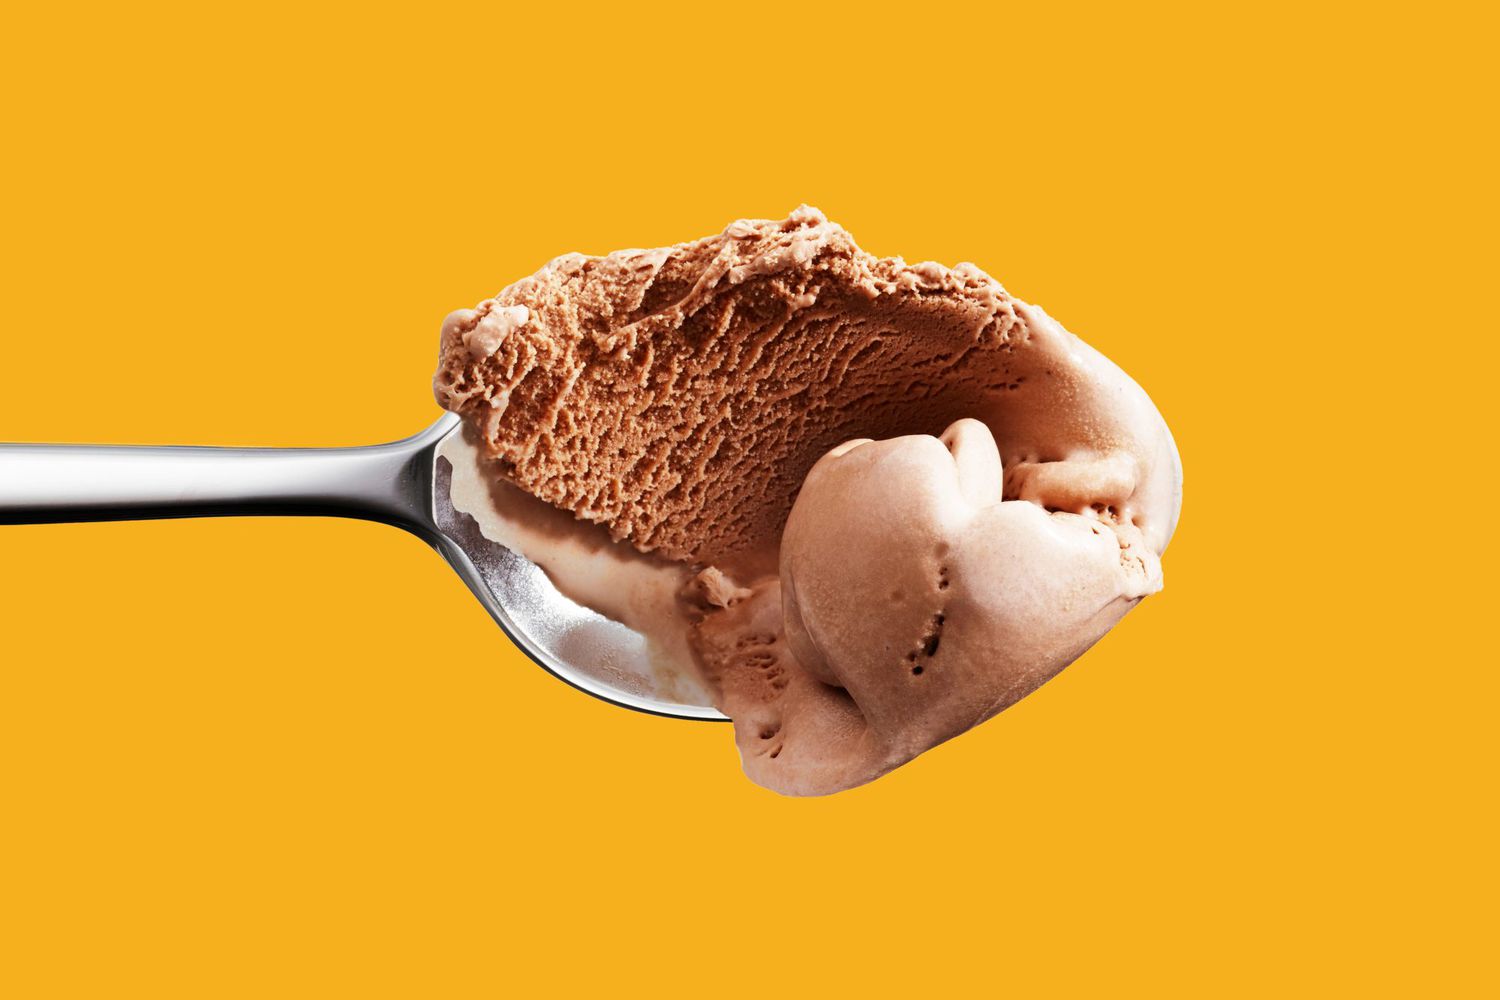 Spoon with a Scoop of chocolate ice cream against an orange background